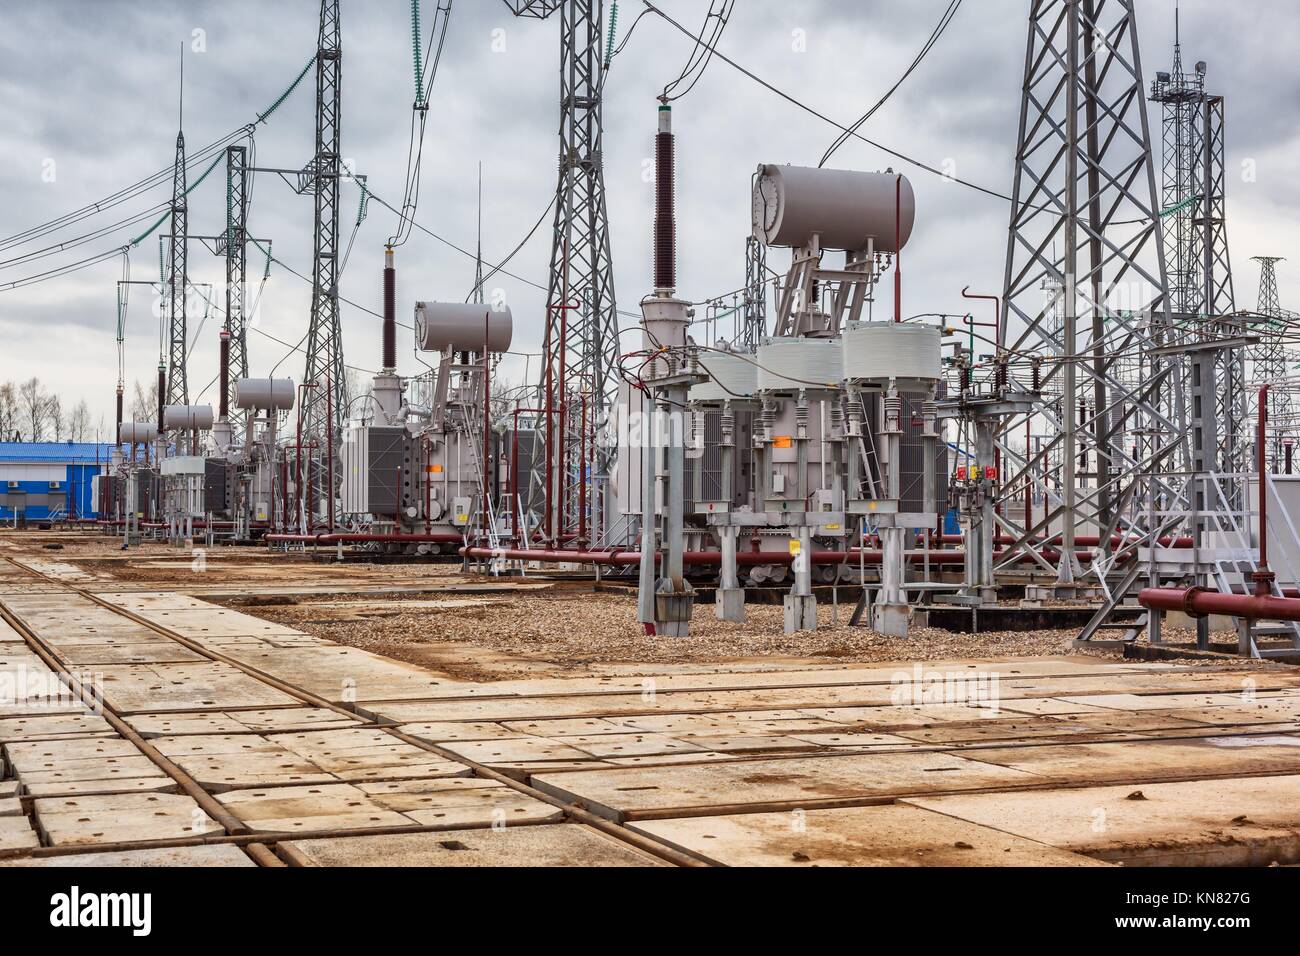 Electric power plant, power transmission line, industrial equipment Stock  Photo - Alamy